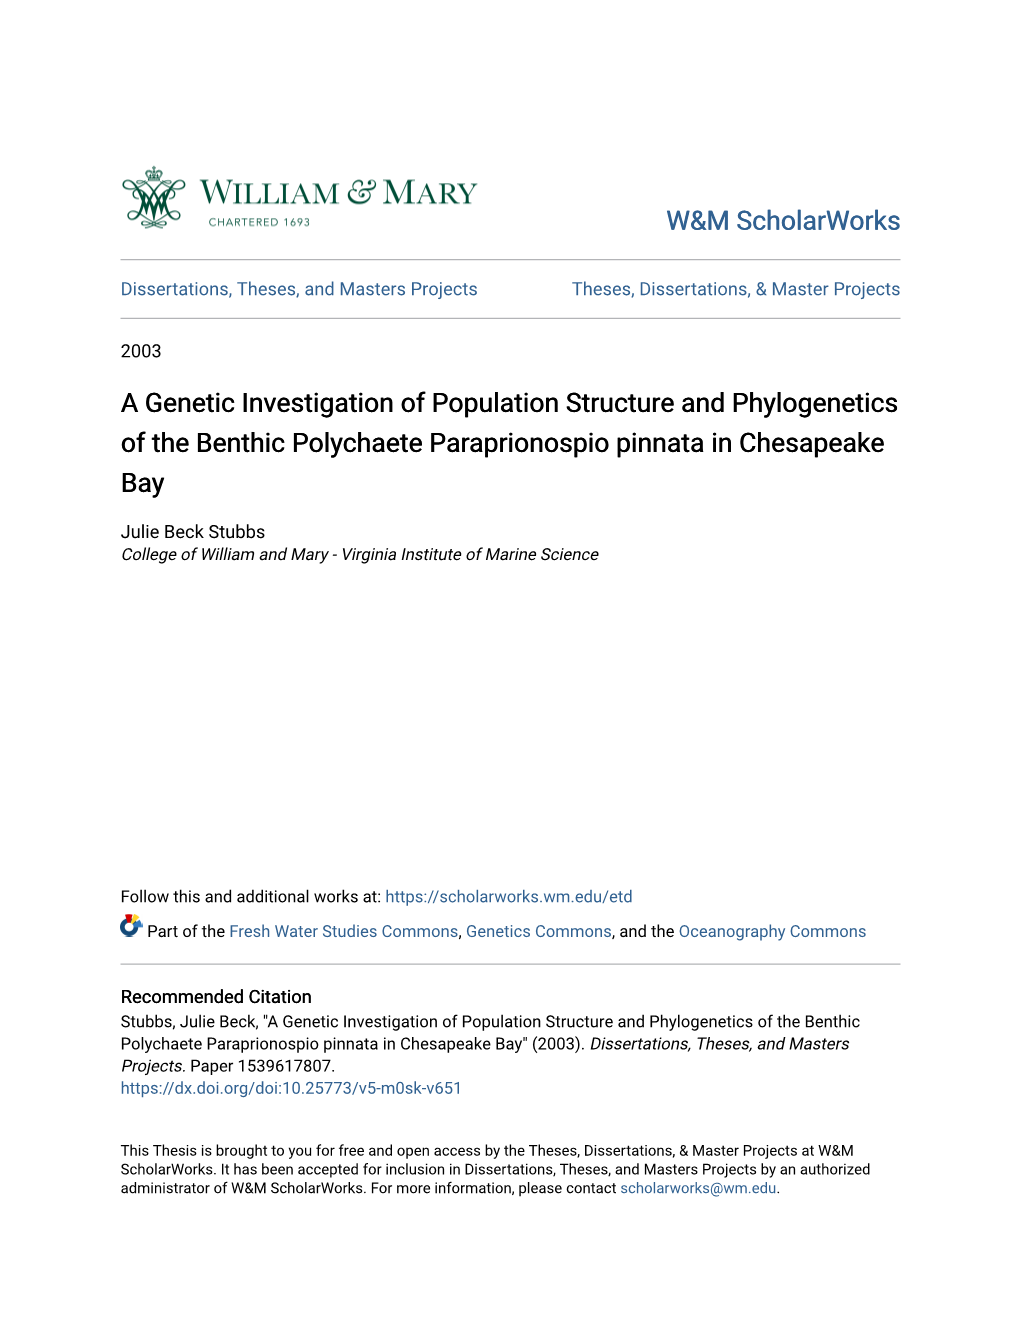 A Genetic Investigation of Population Structure and Phylogenetics of the Benthic Polychaete Paraprionospio Pinnata in Chesapeake Bay